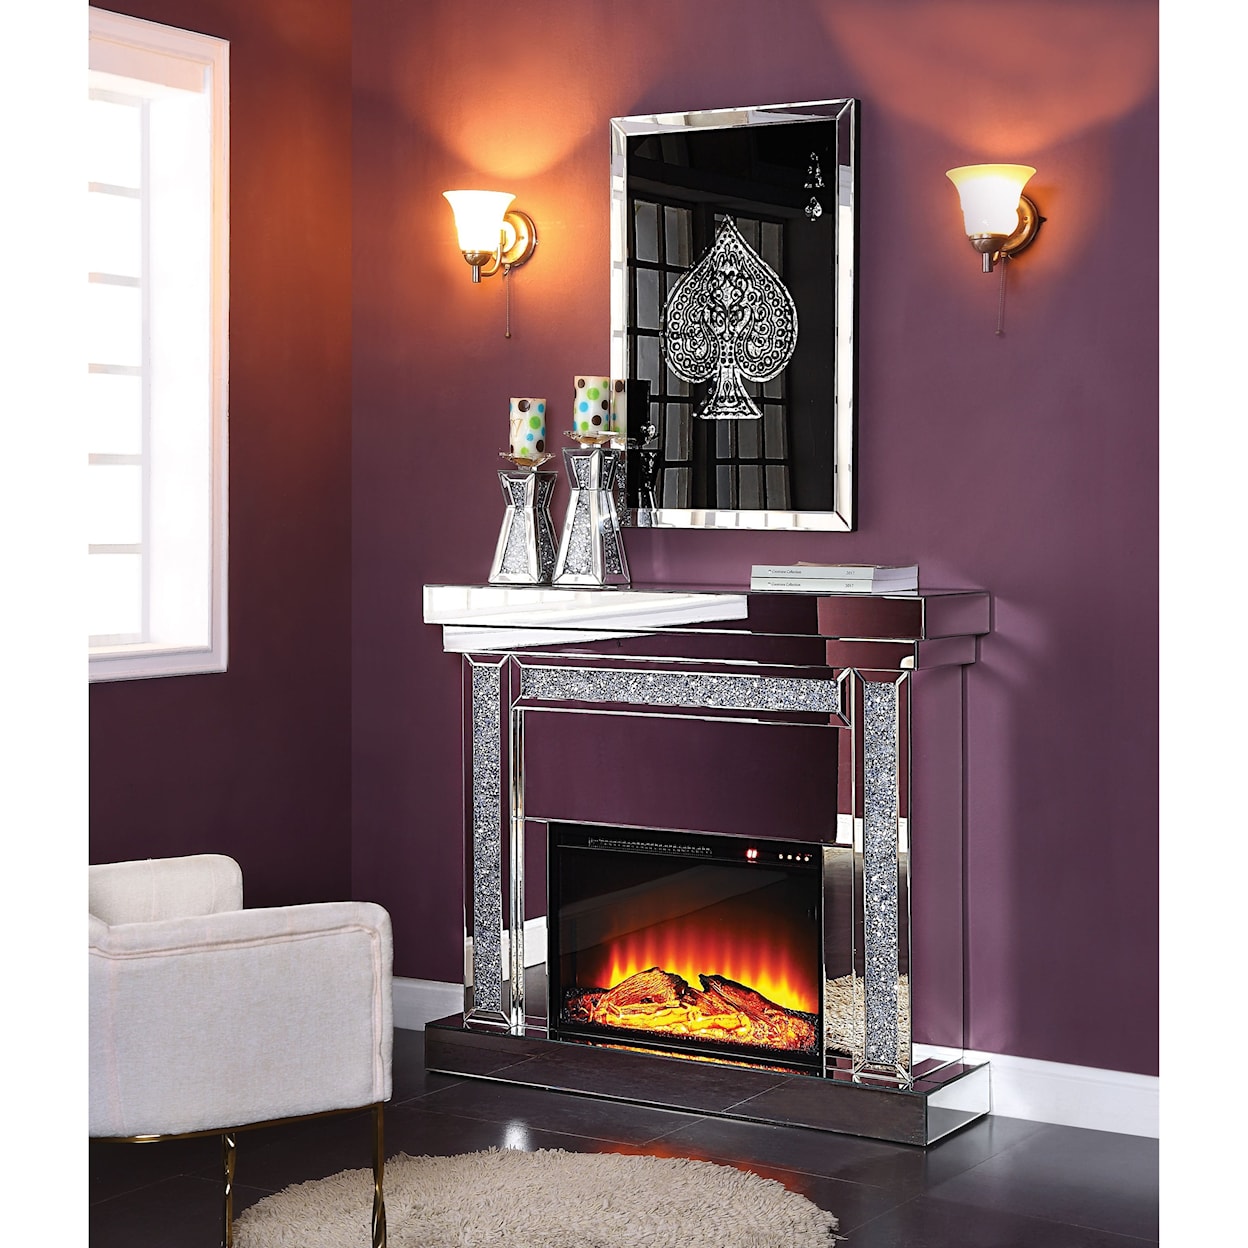 Acme Furniture Noralie Fireplace